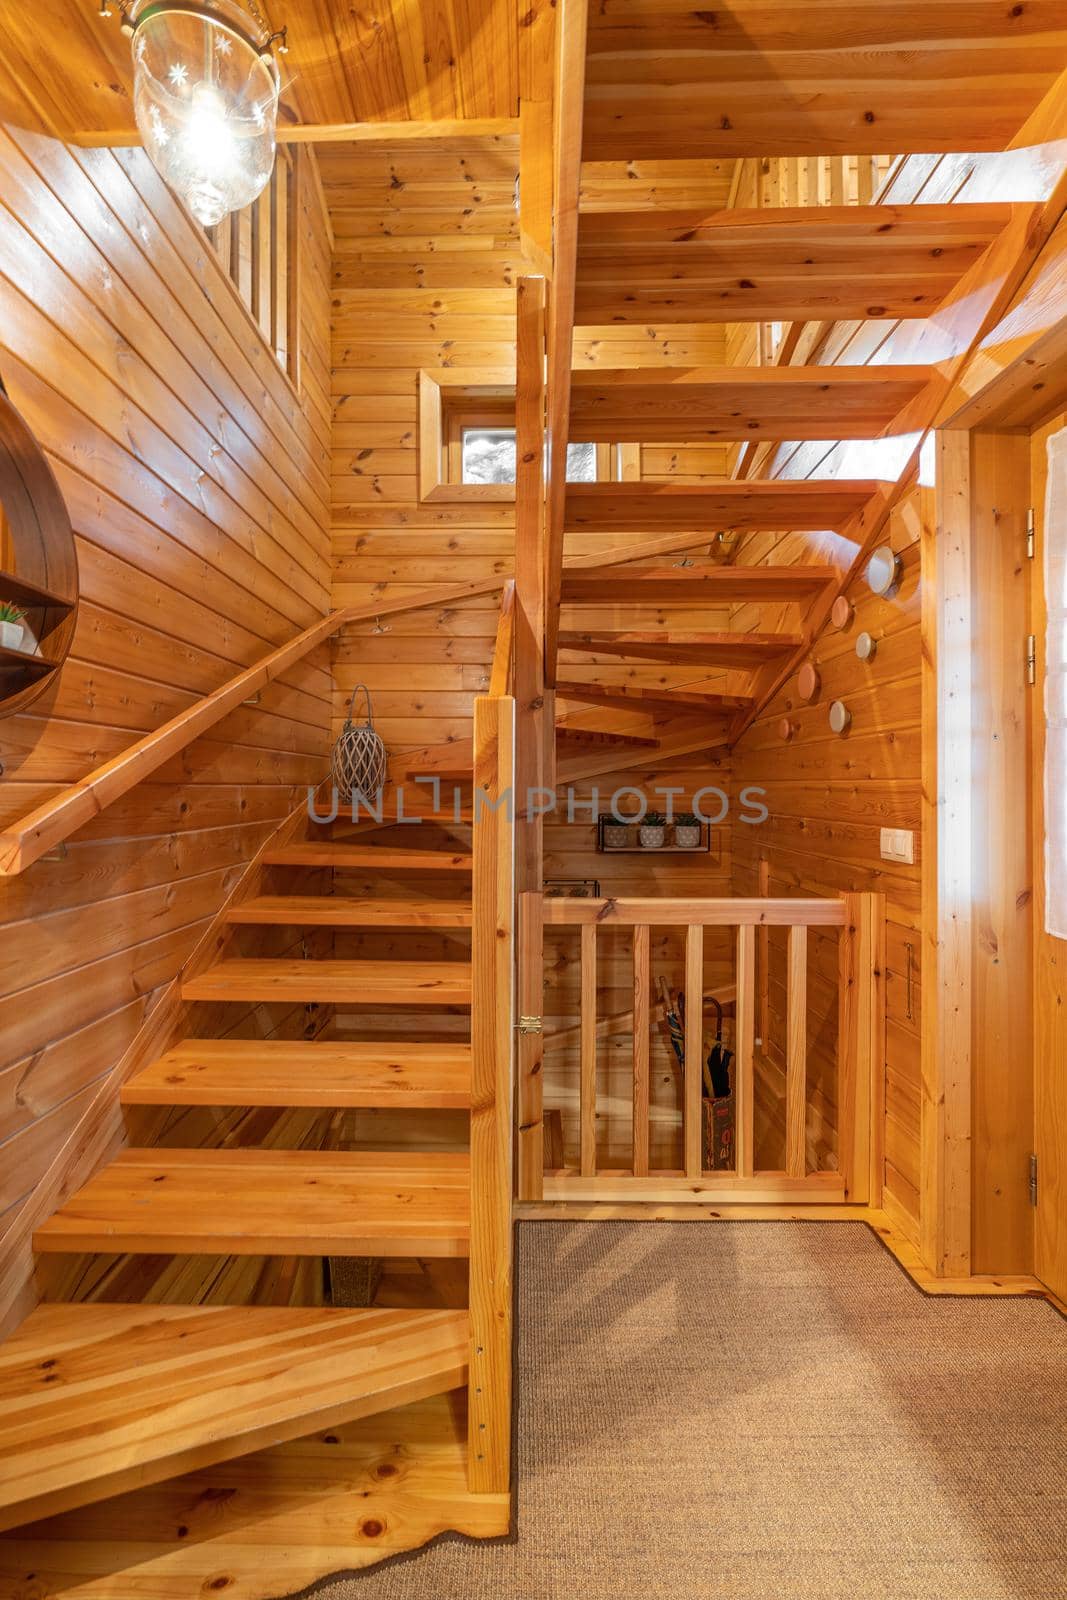 Wooden stairs in a small country house. Hallway of cozy house in a village